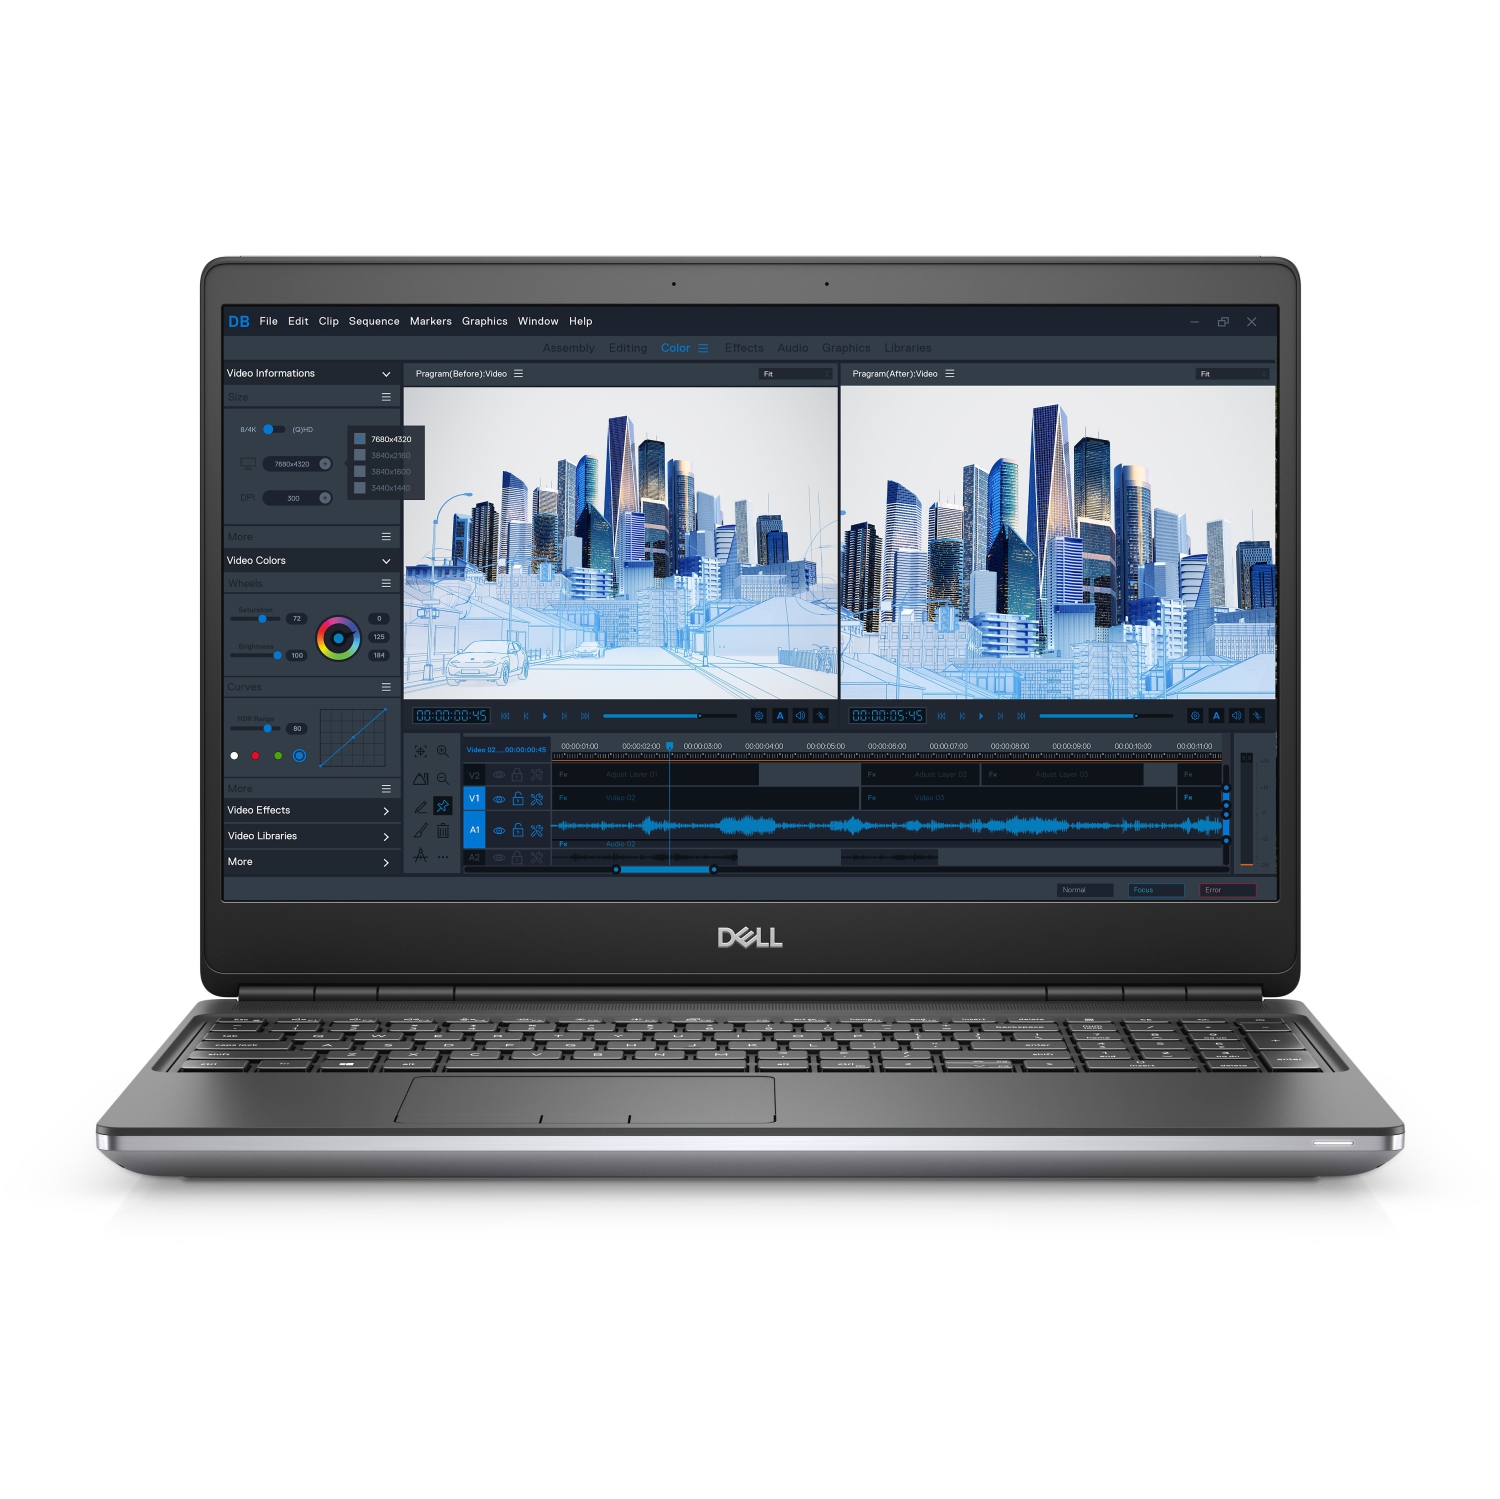 Refurbished (Excellent) - Dell Precision 7000 7560 Workstation Laptop (2021), 15.6" FHD, Core i9, 2TB SSD, 64GB RAM, RTX A4000, 8 Cores @ 5 GHz, 11th Gen CPU Certified